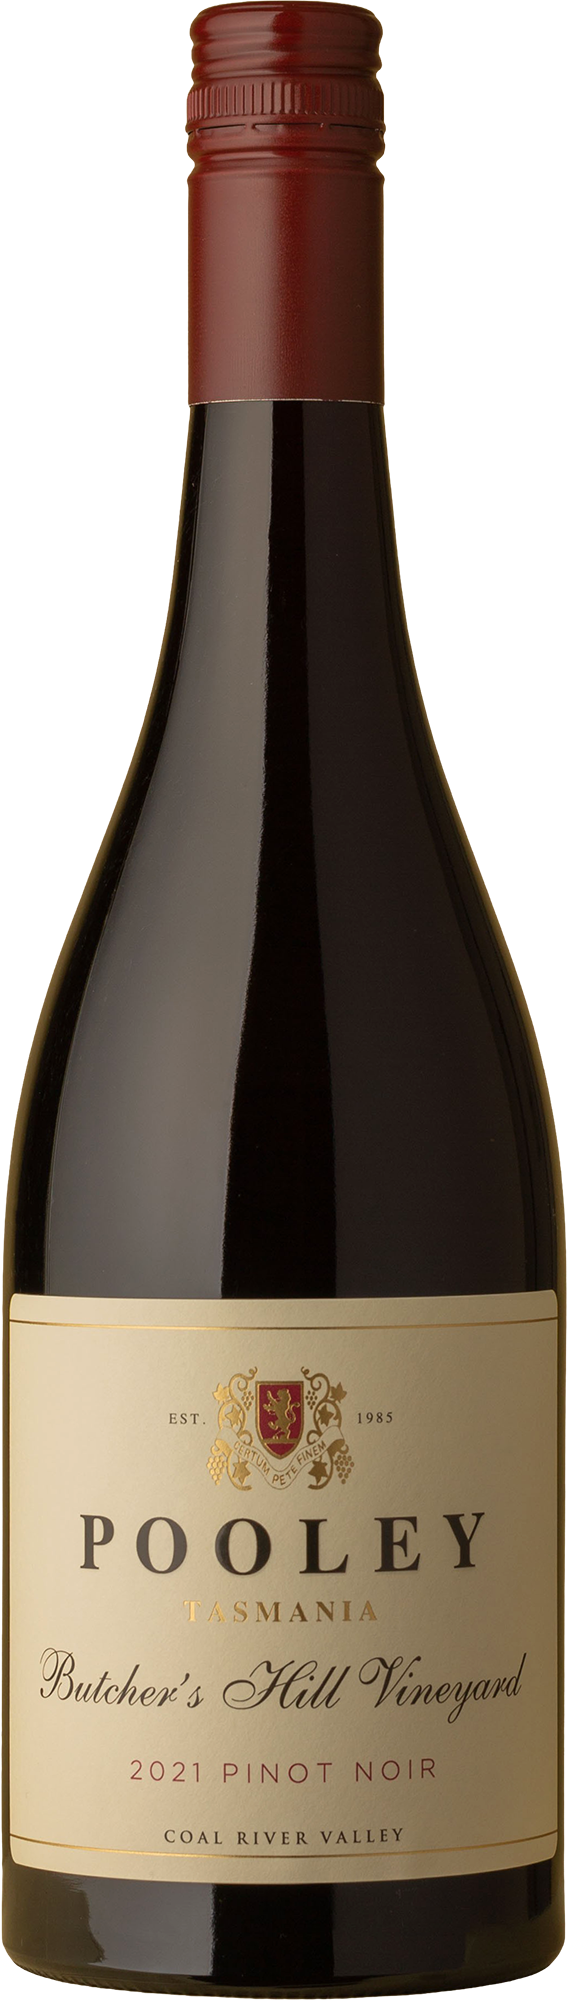 Pooley - Butcher's Hill Pinot Noir 2021 Red Wine